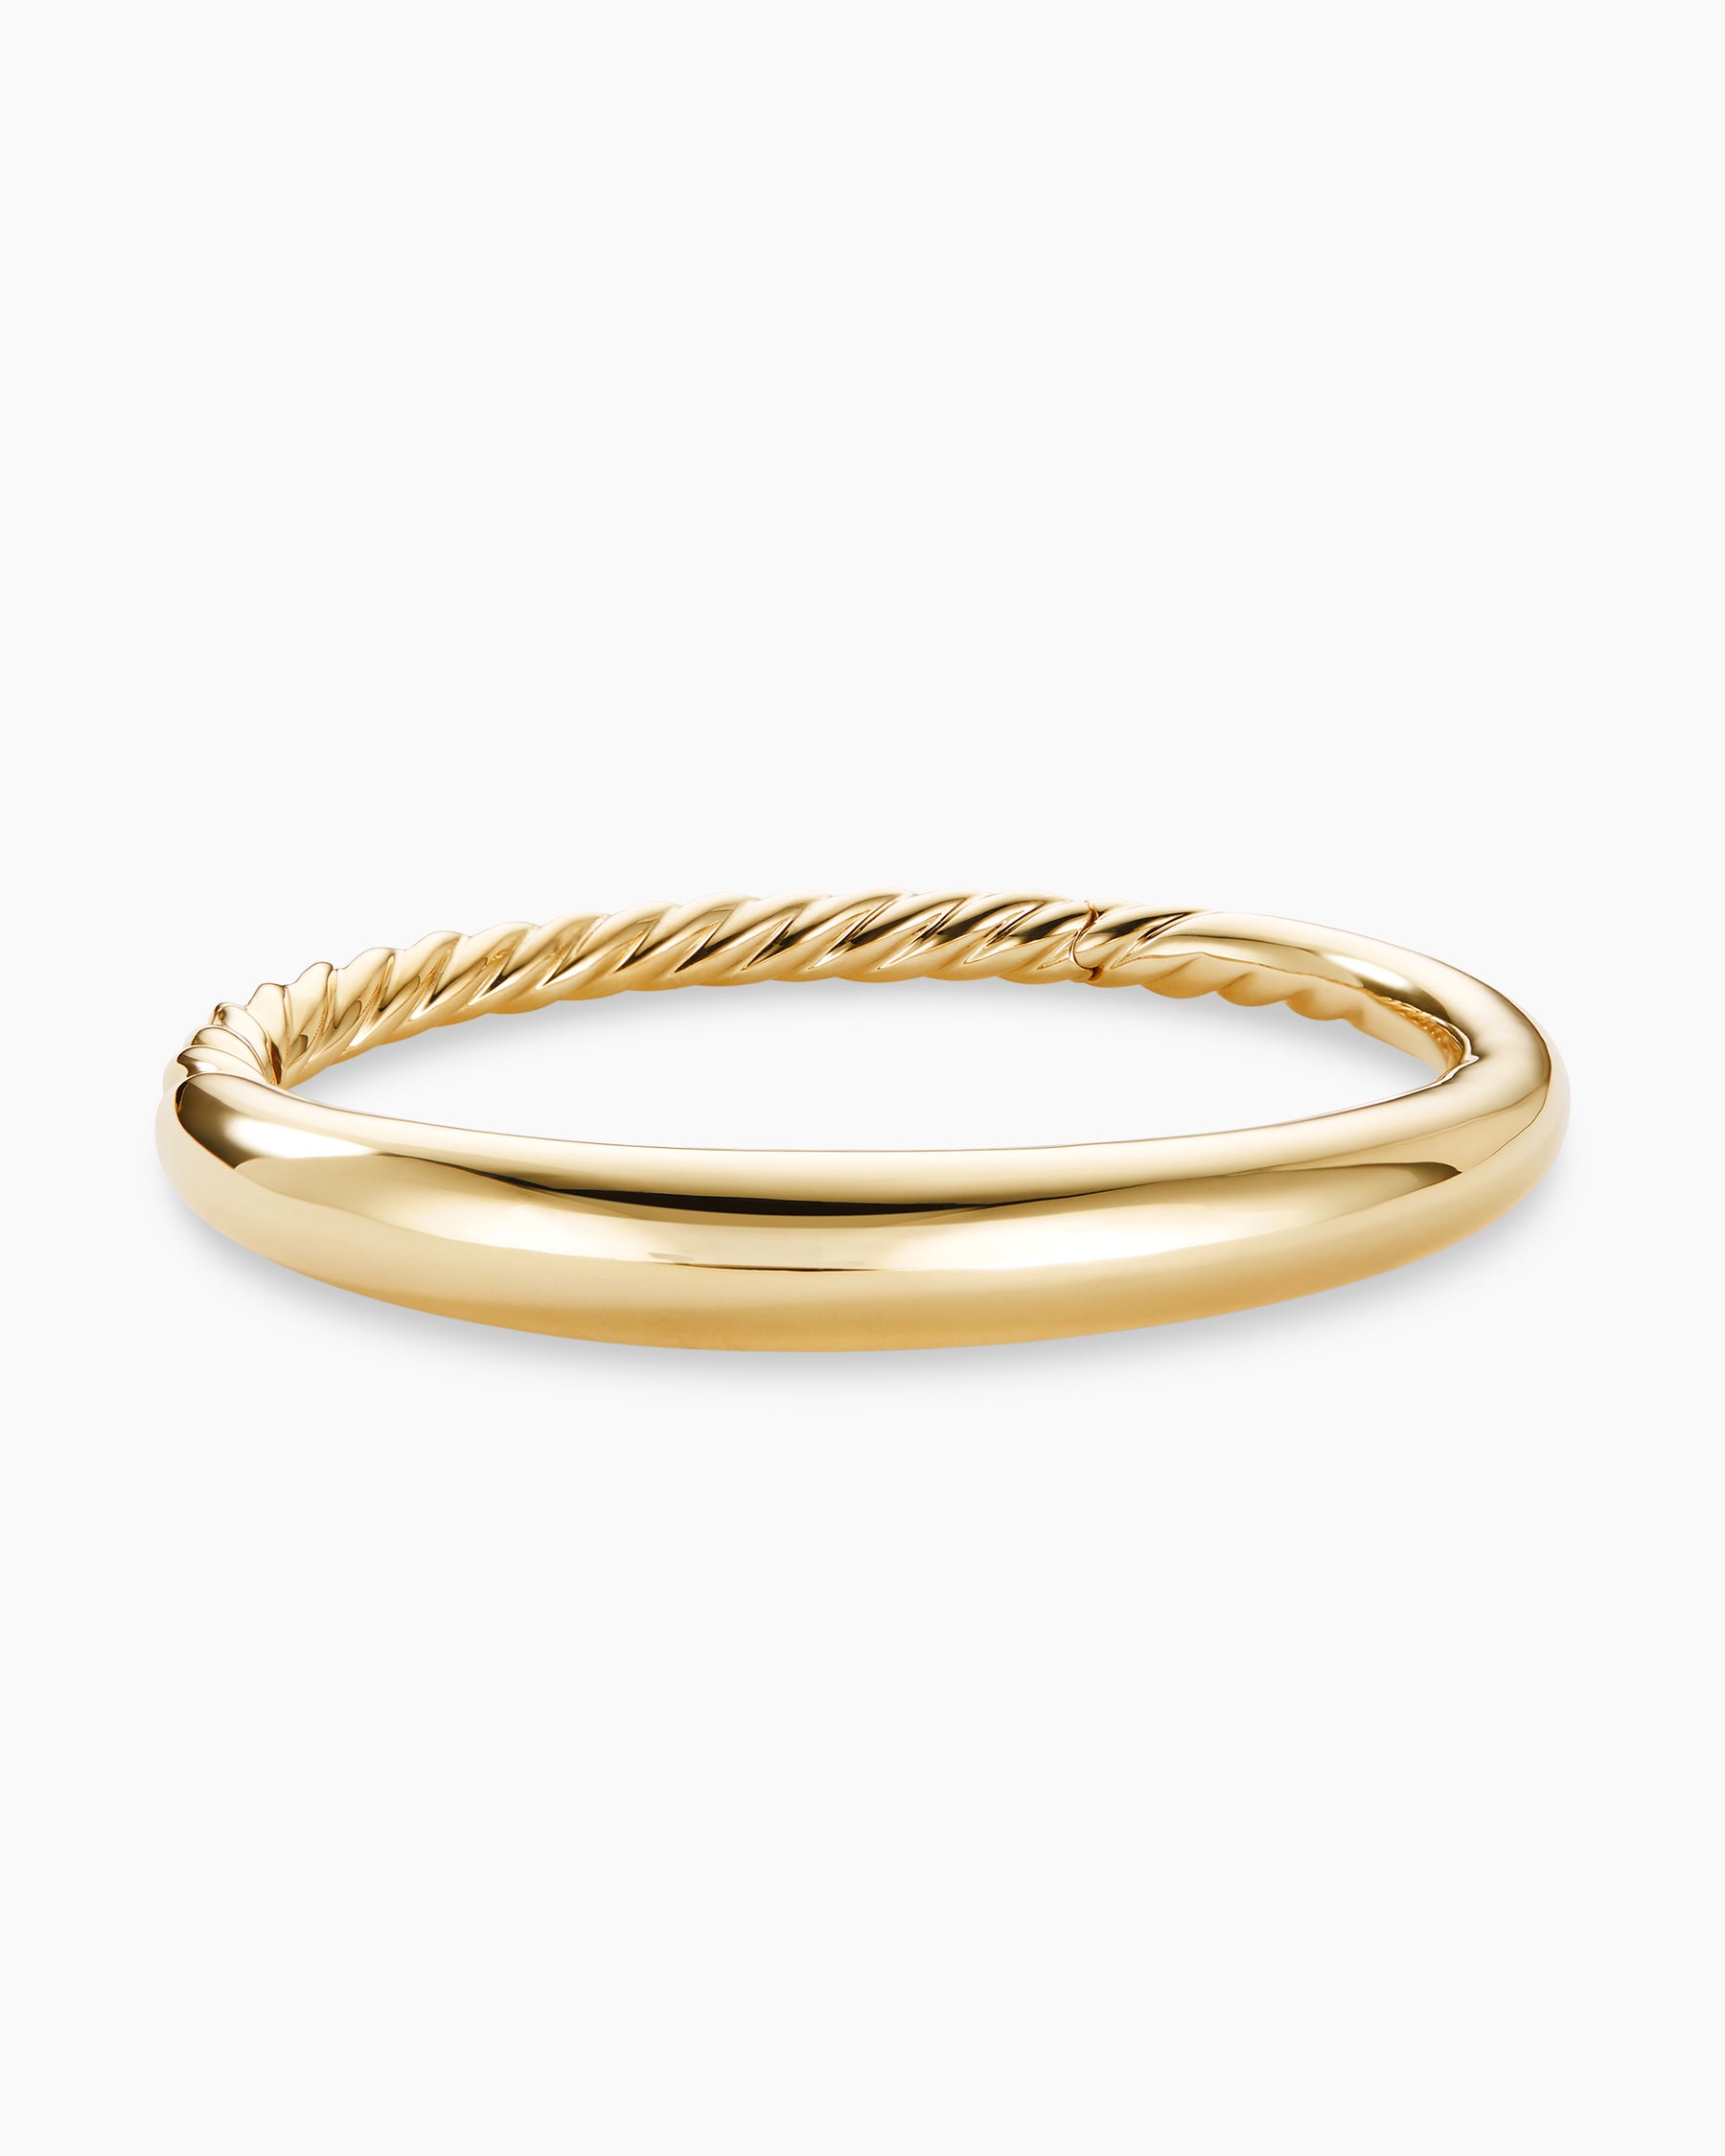 9k Yellow Gold Single Hook Bangle 18x7.5 mm wide - 8 inches - TOP JEWELLERY